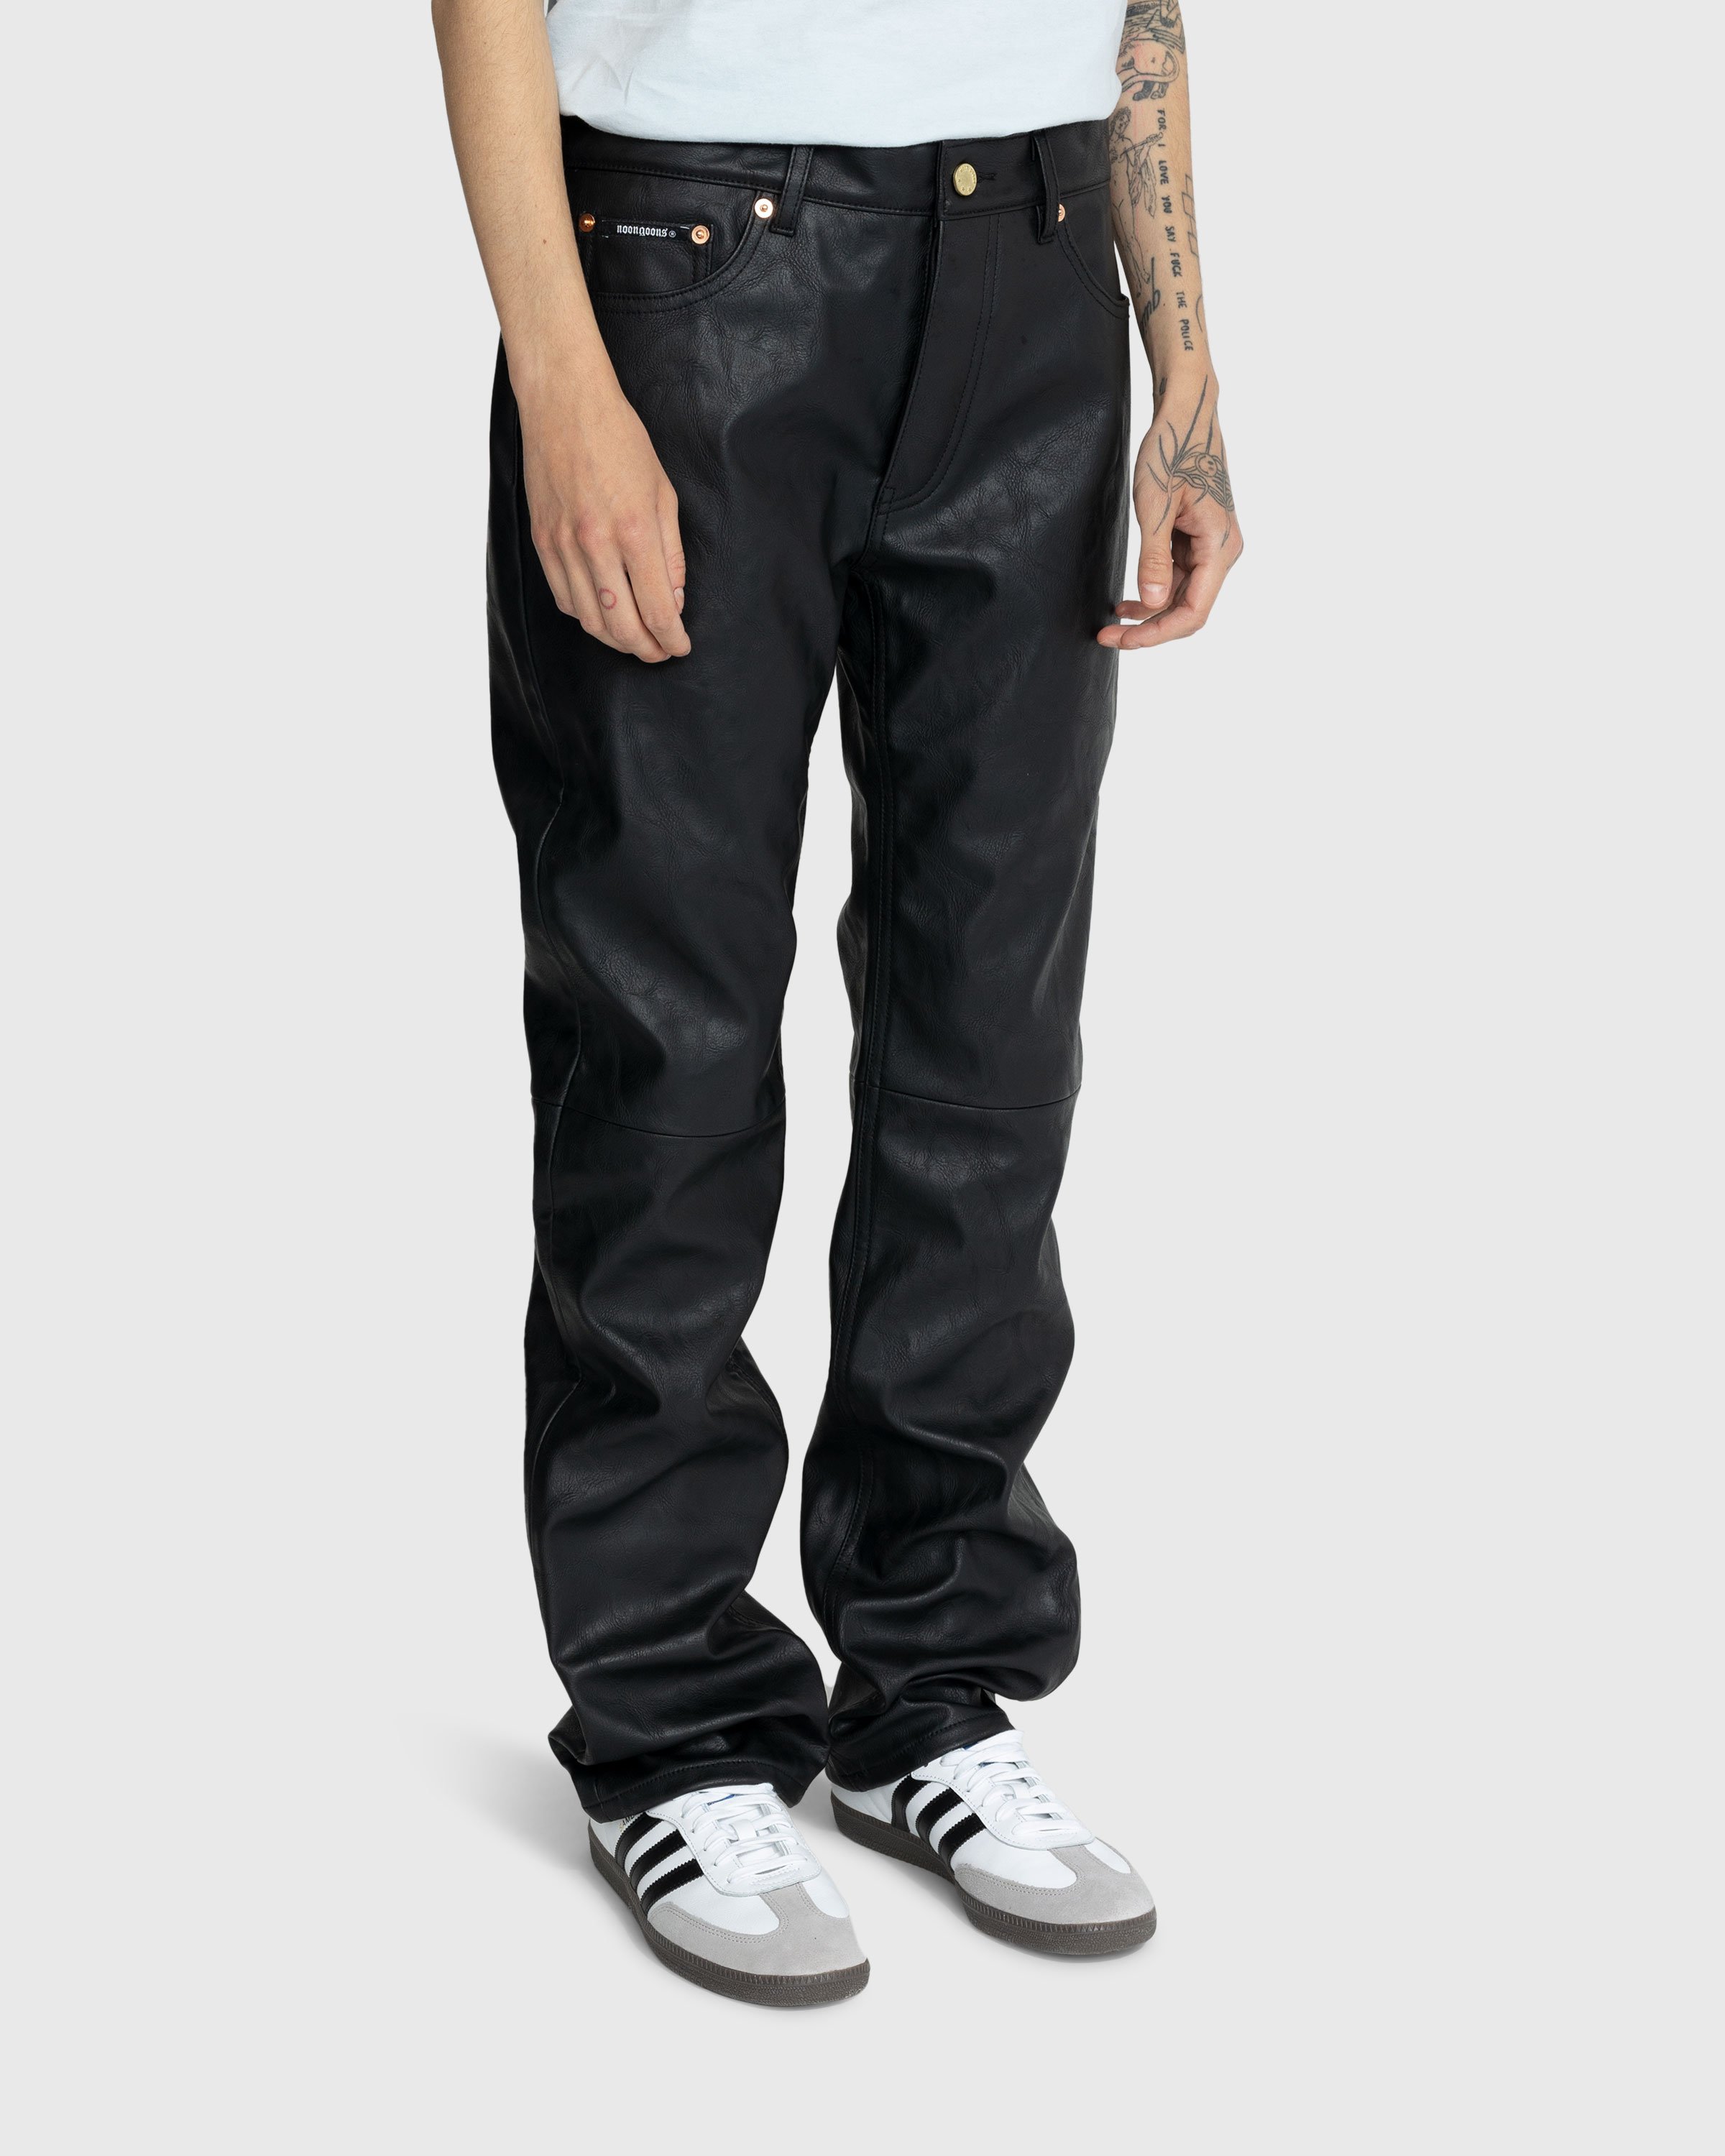 Noon Goons - GP Faux Leather Pant Black - Clothing - Black - Image 3